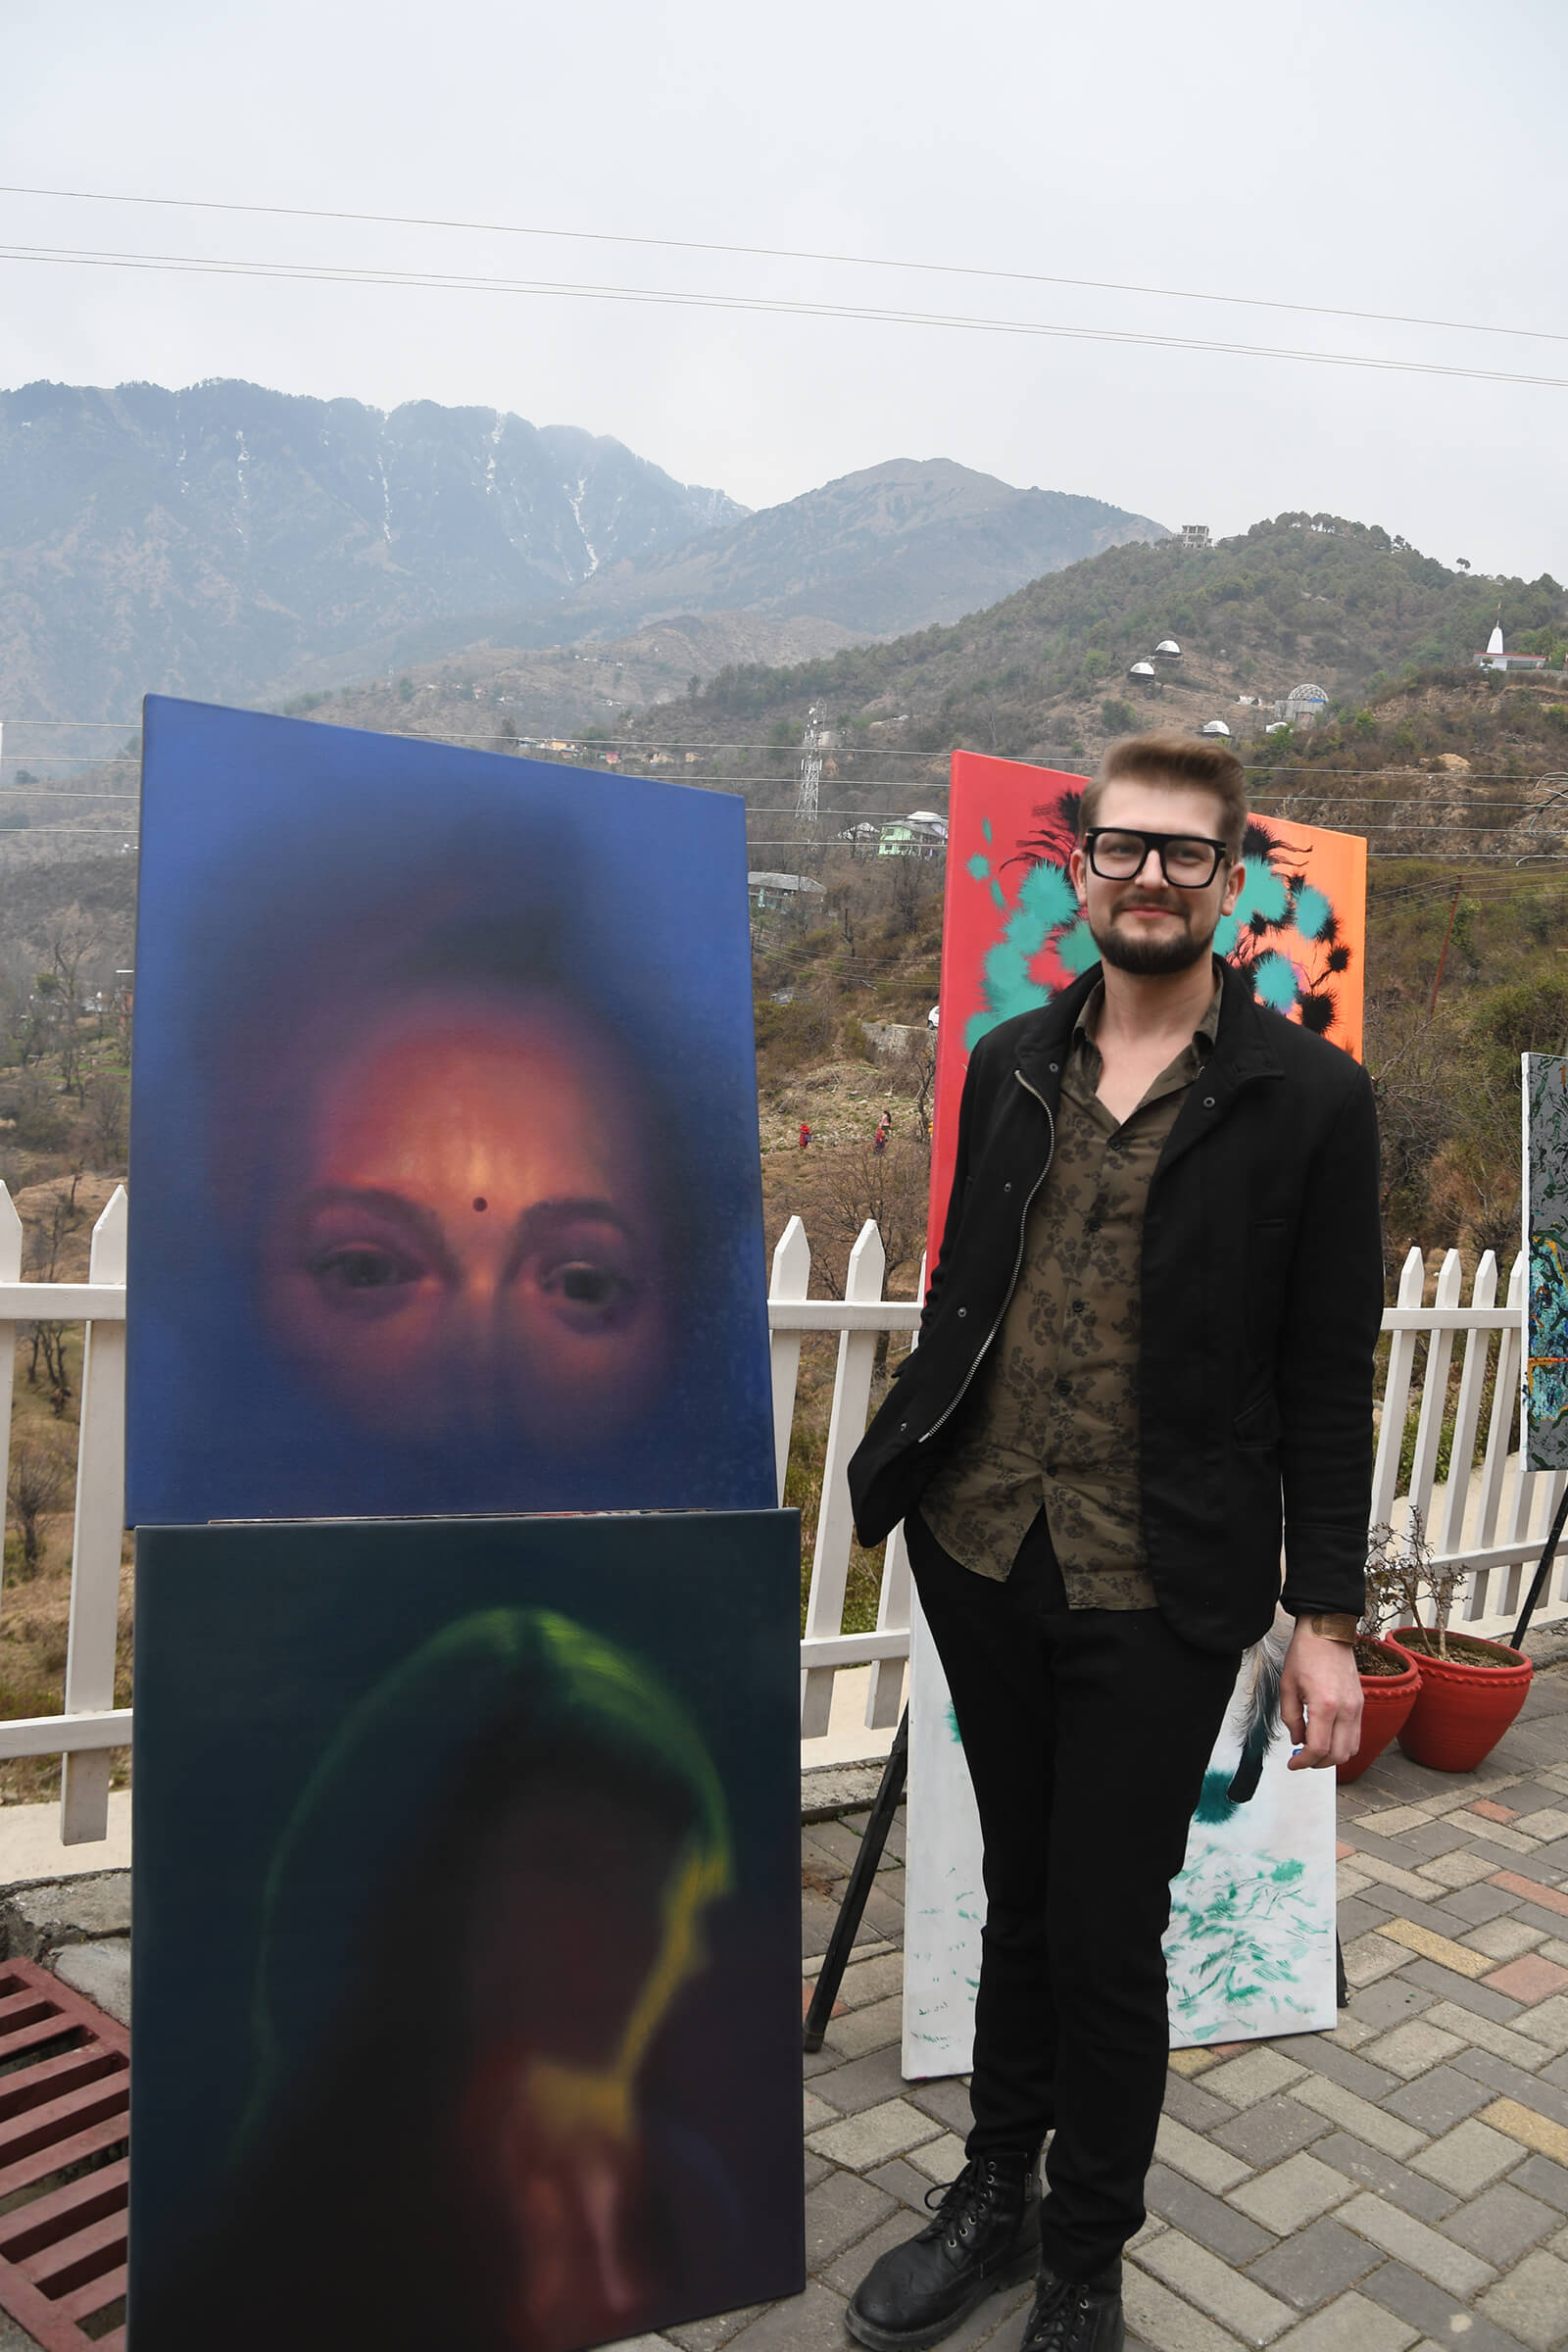 Tomasz Wiktor poses with his art works